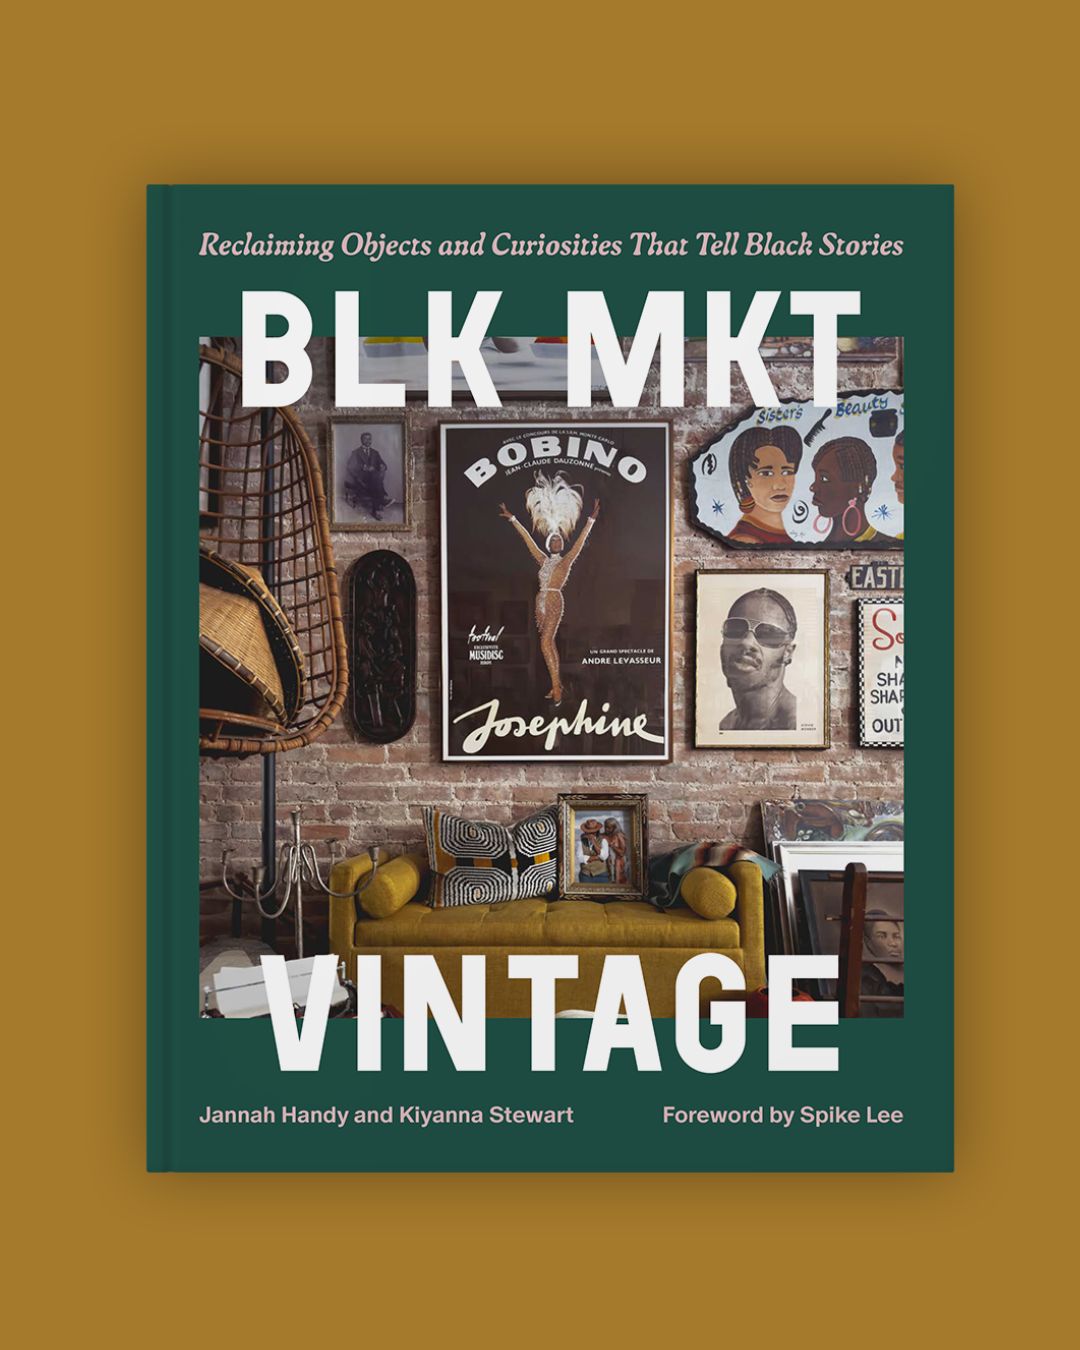 Pre-Order for "BLK MKT Vintage: Reclaiming Objects and Curiosities That Tell Black Stories"